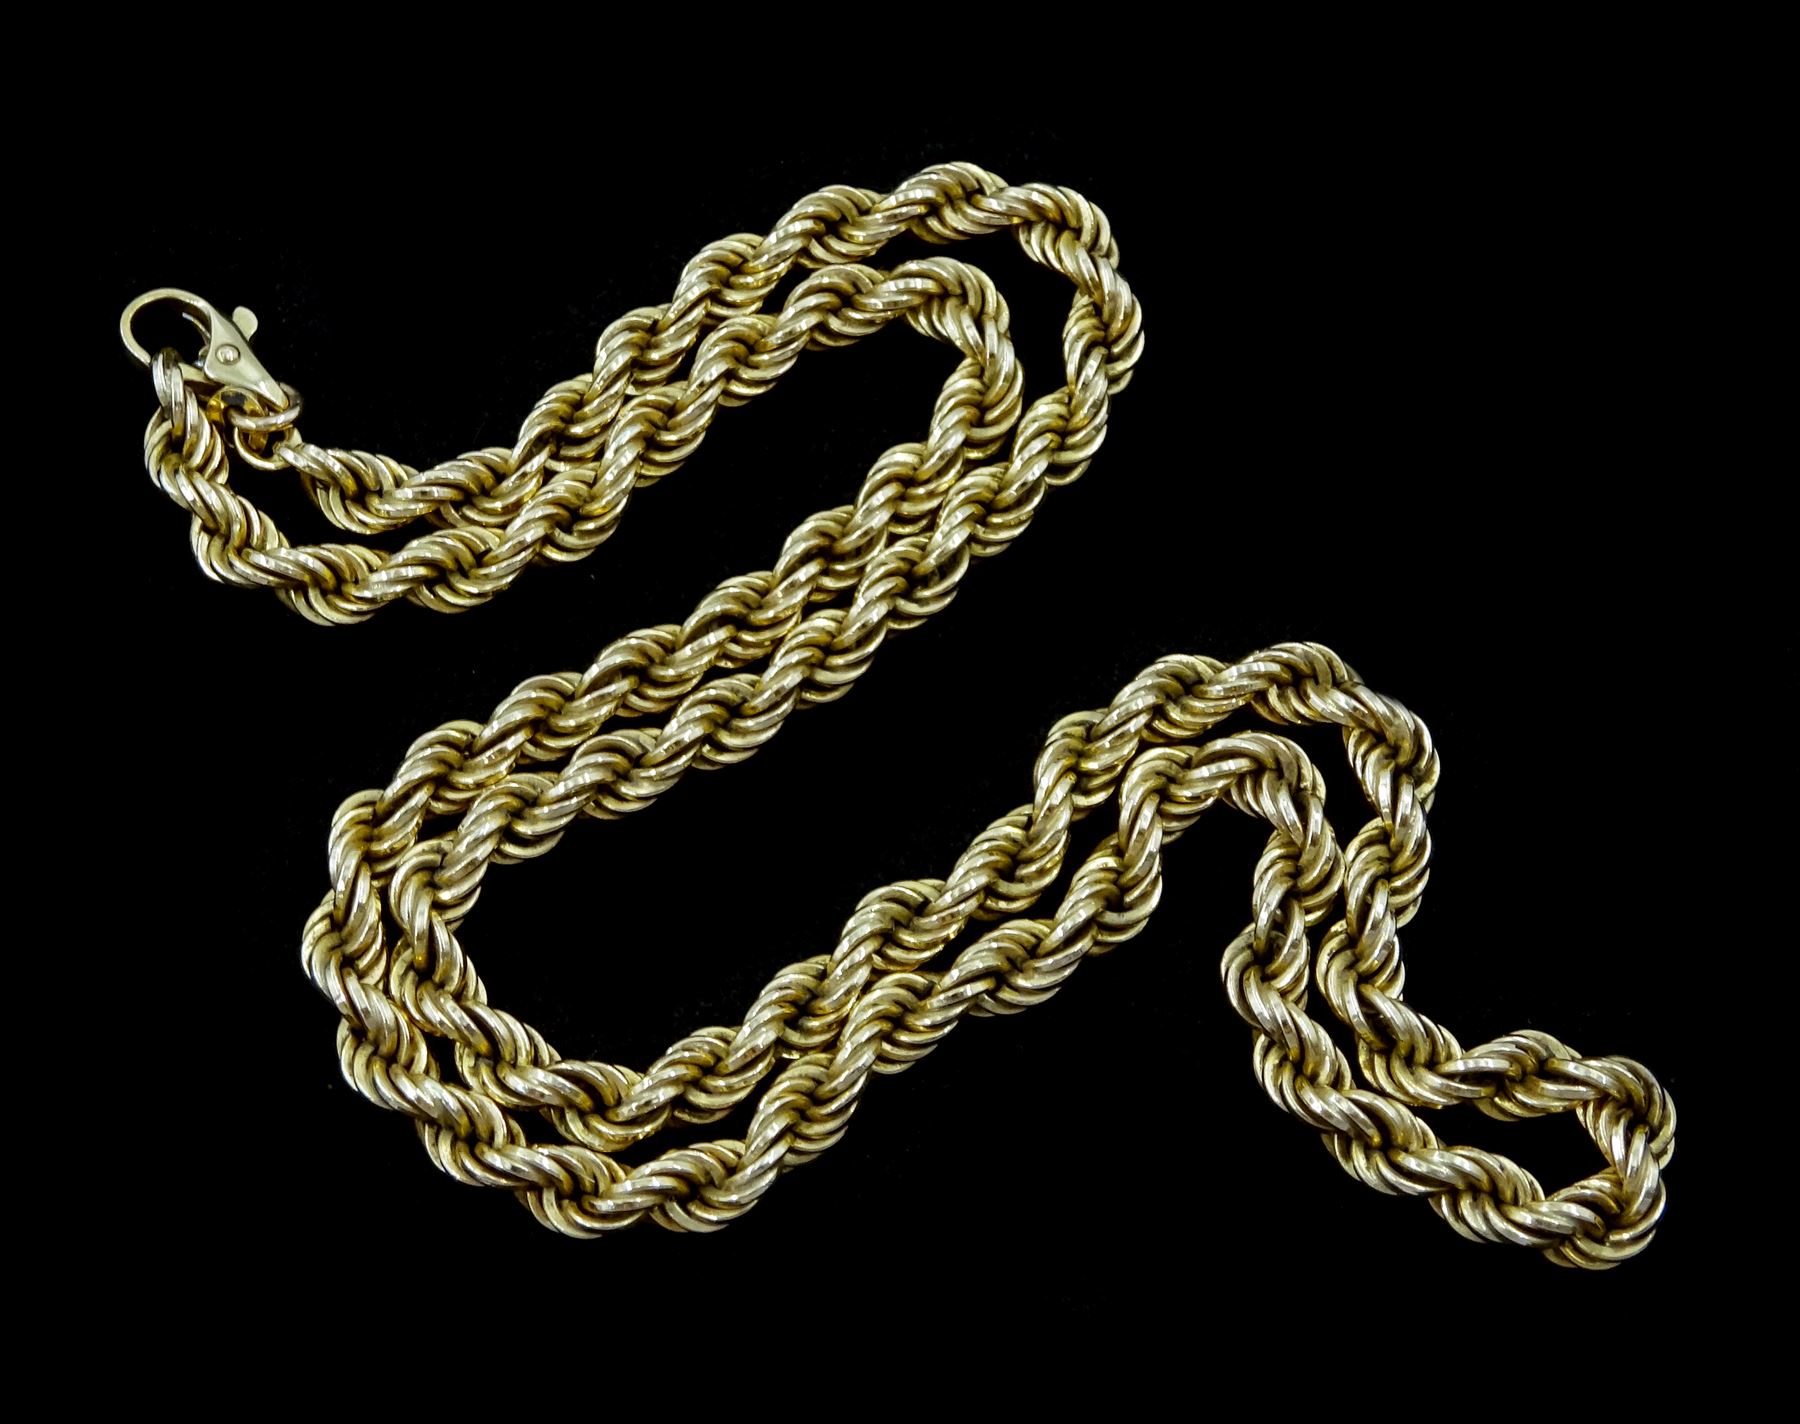 9ct gold rope twist link necklace - Image 2 of 2